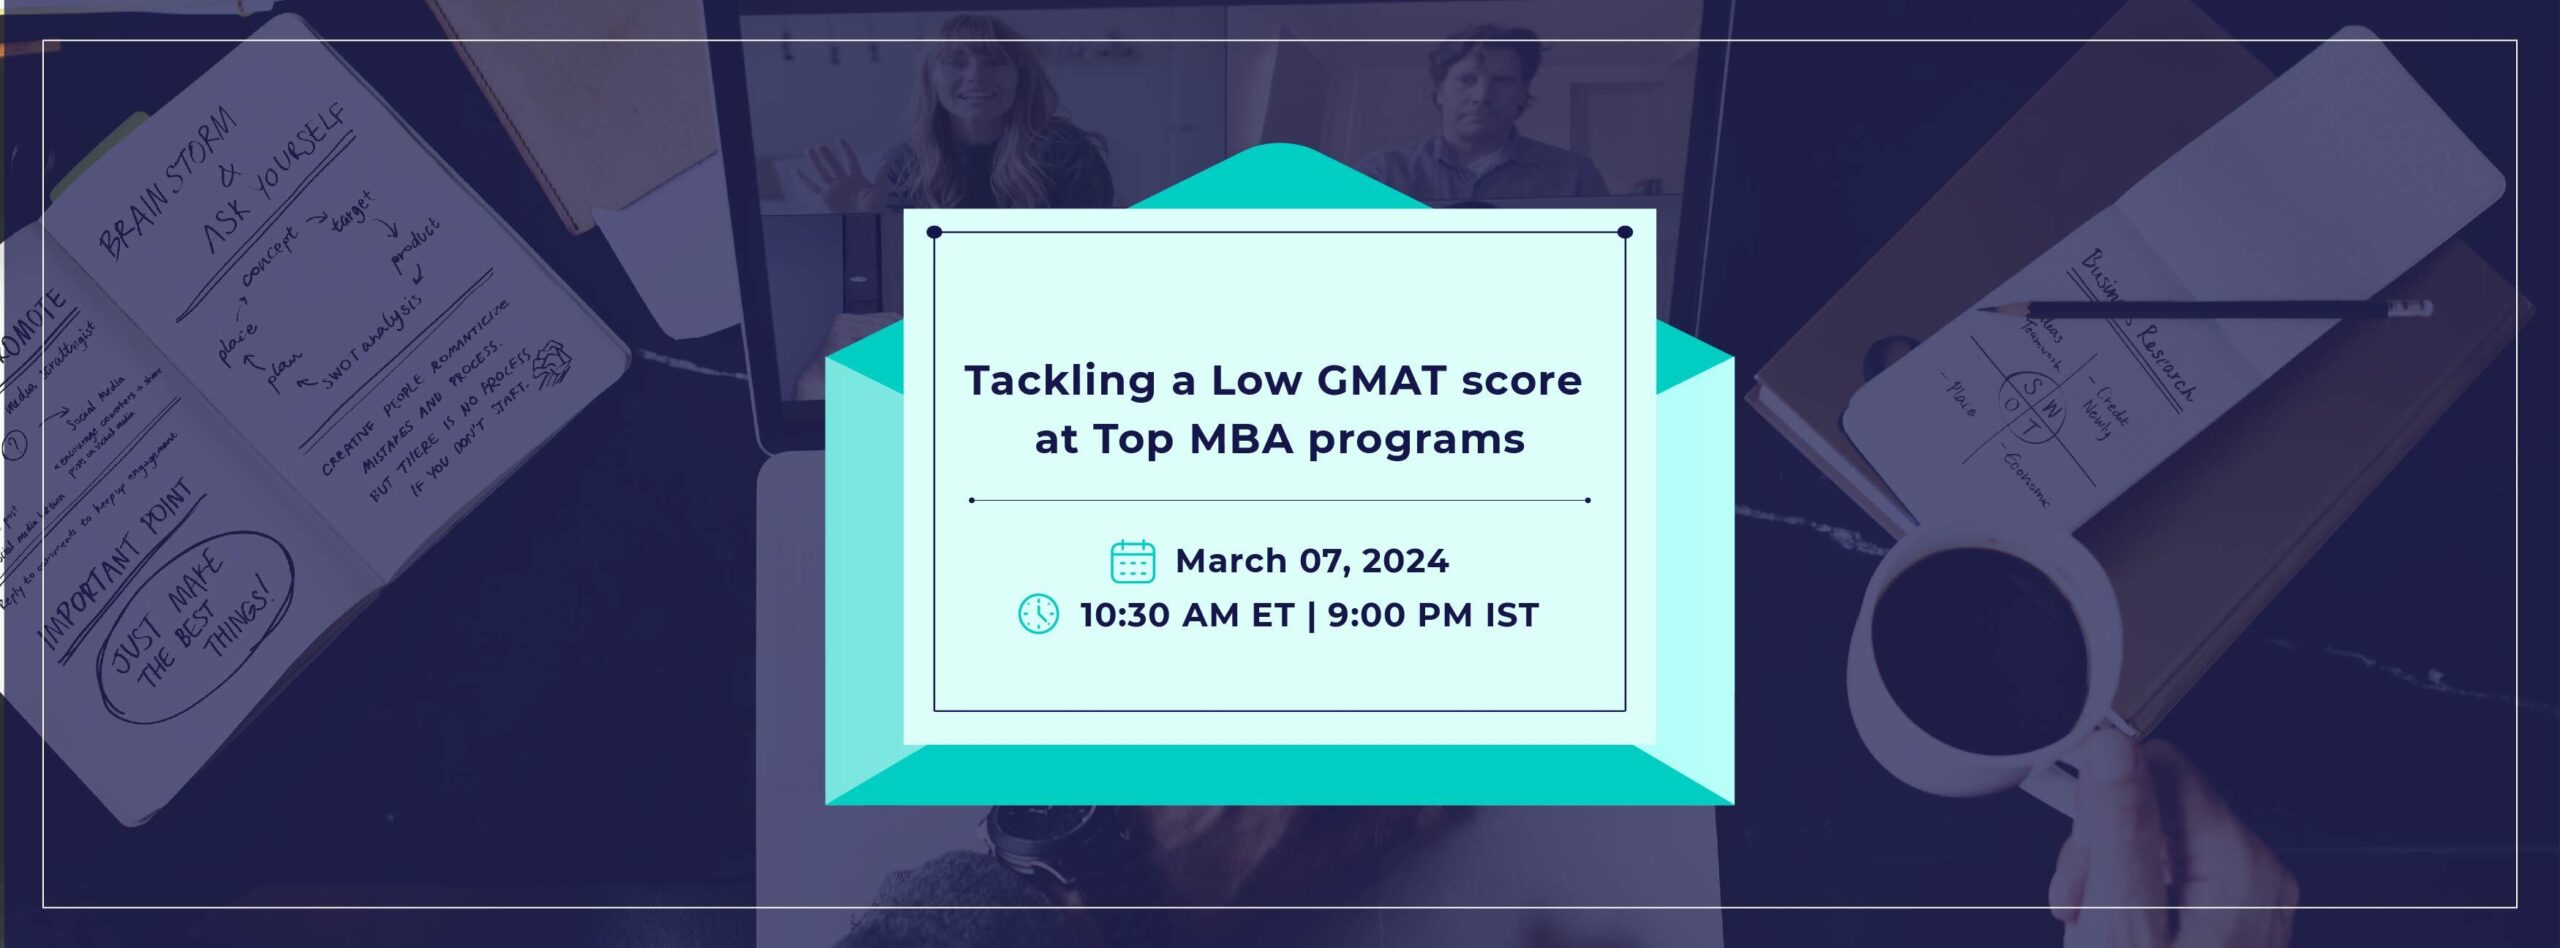 Tackling a LOW GMAT Score for Top MBA Programs